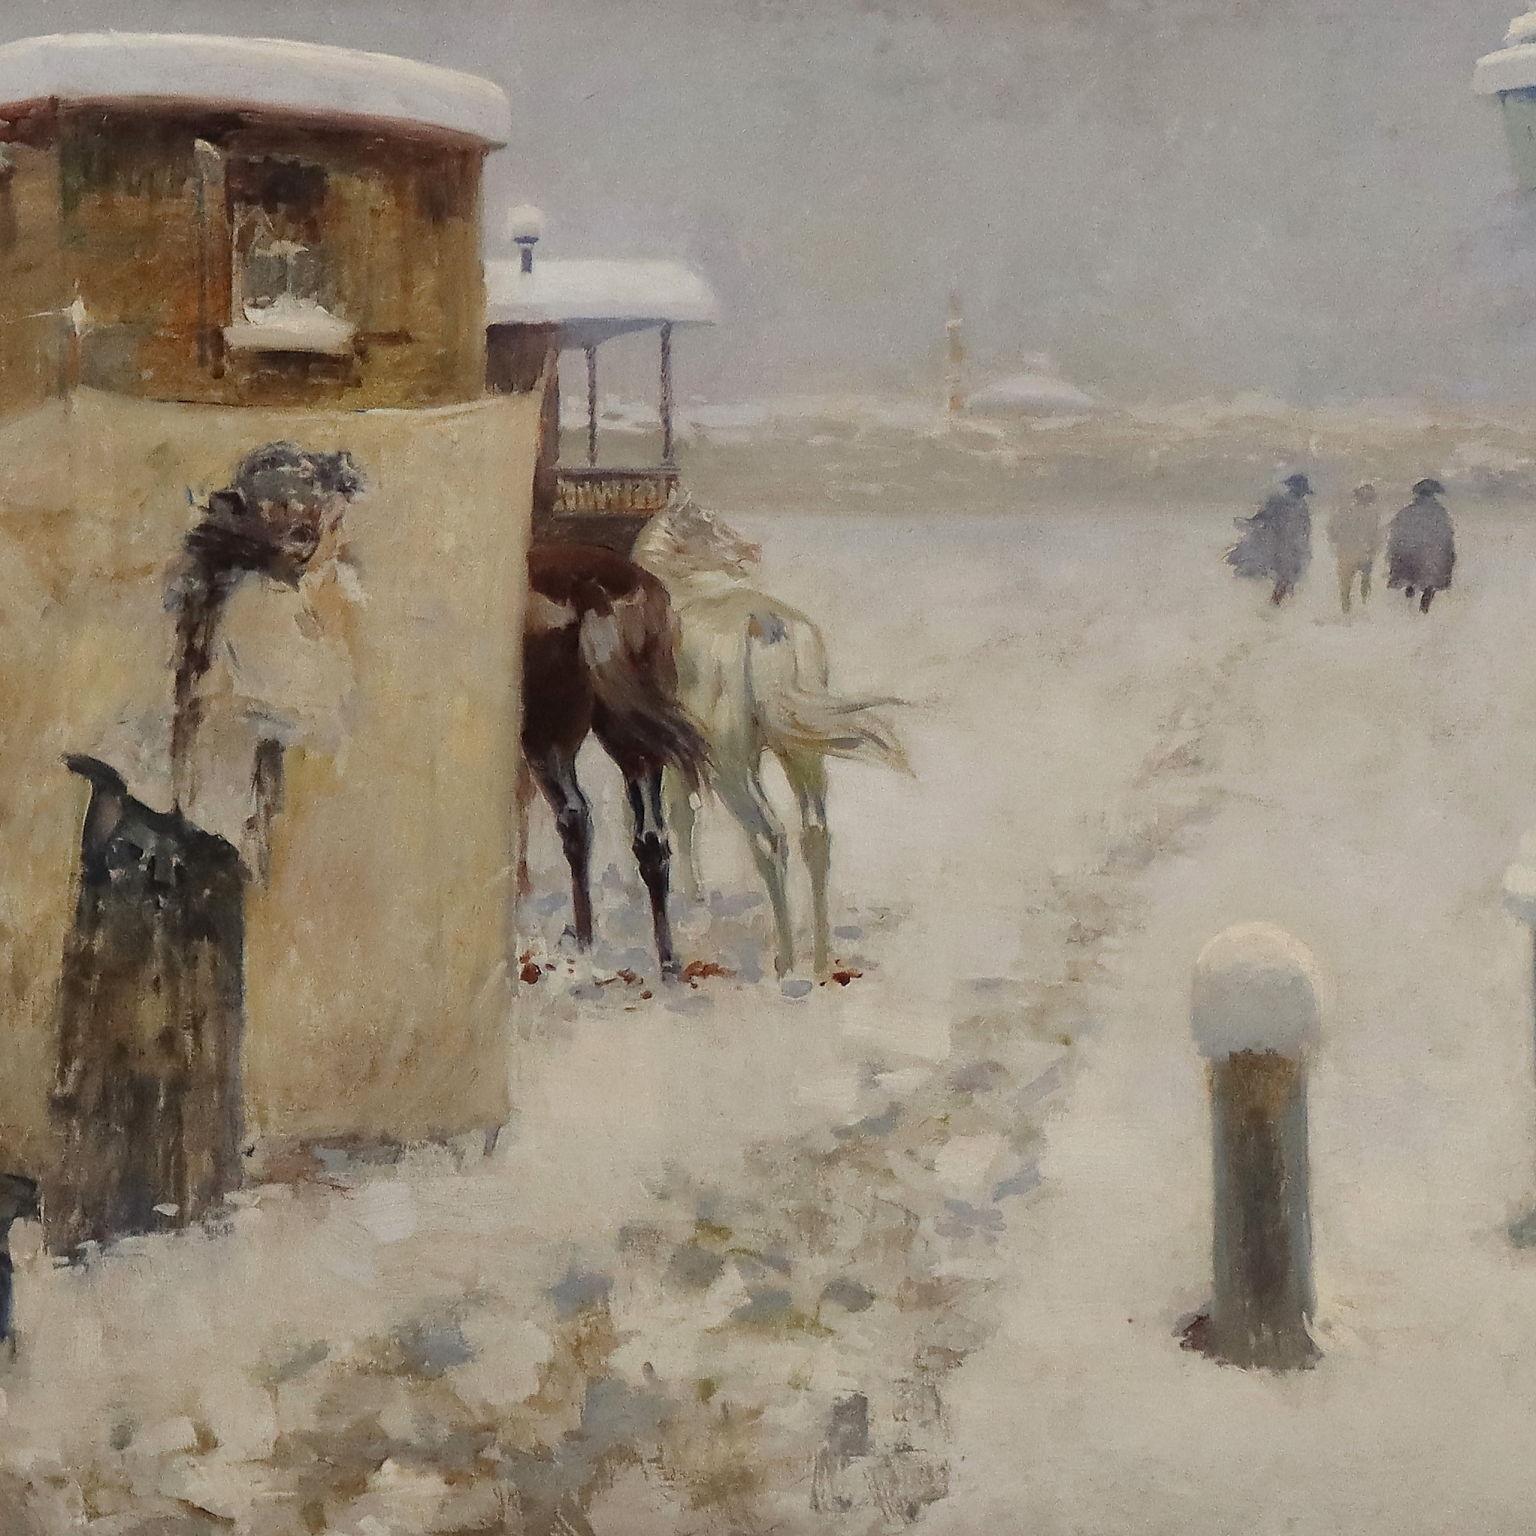 Oil on Canvas. Italian school of the early 20th century.
The large scene is set in a desolate landscape completely covered in snow: on the left in the foreground, behind a group of wagons and mobile homes (probably a gypsy camp) a woman weeps